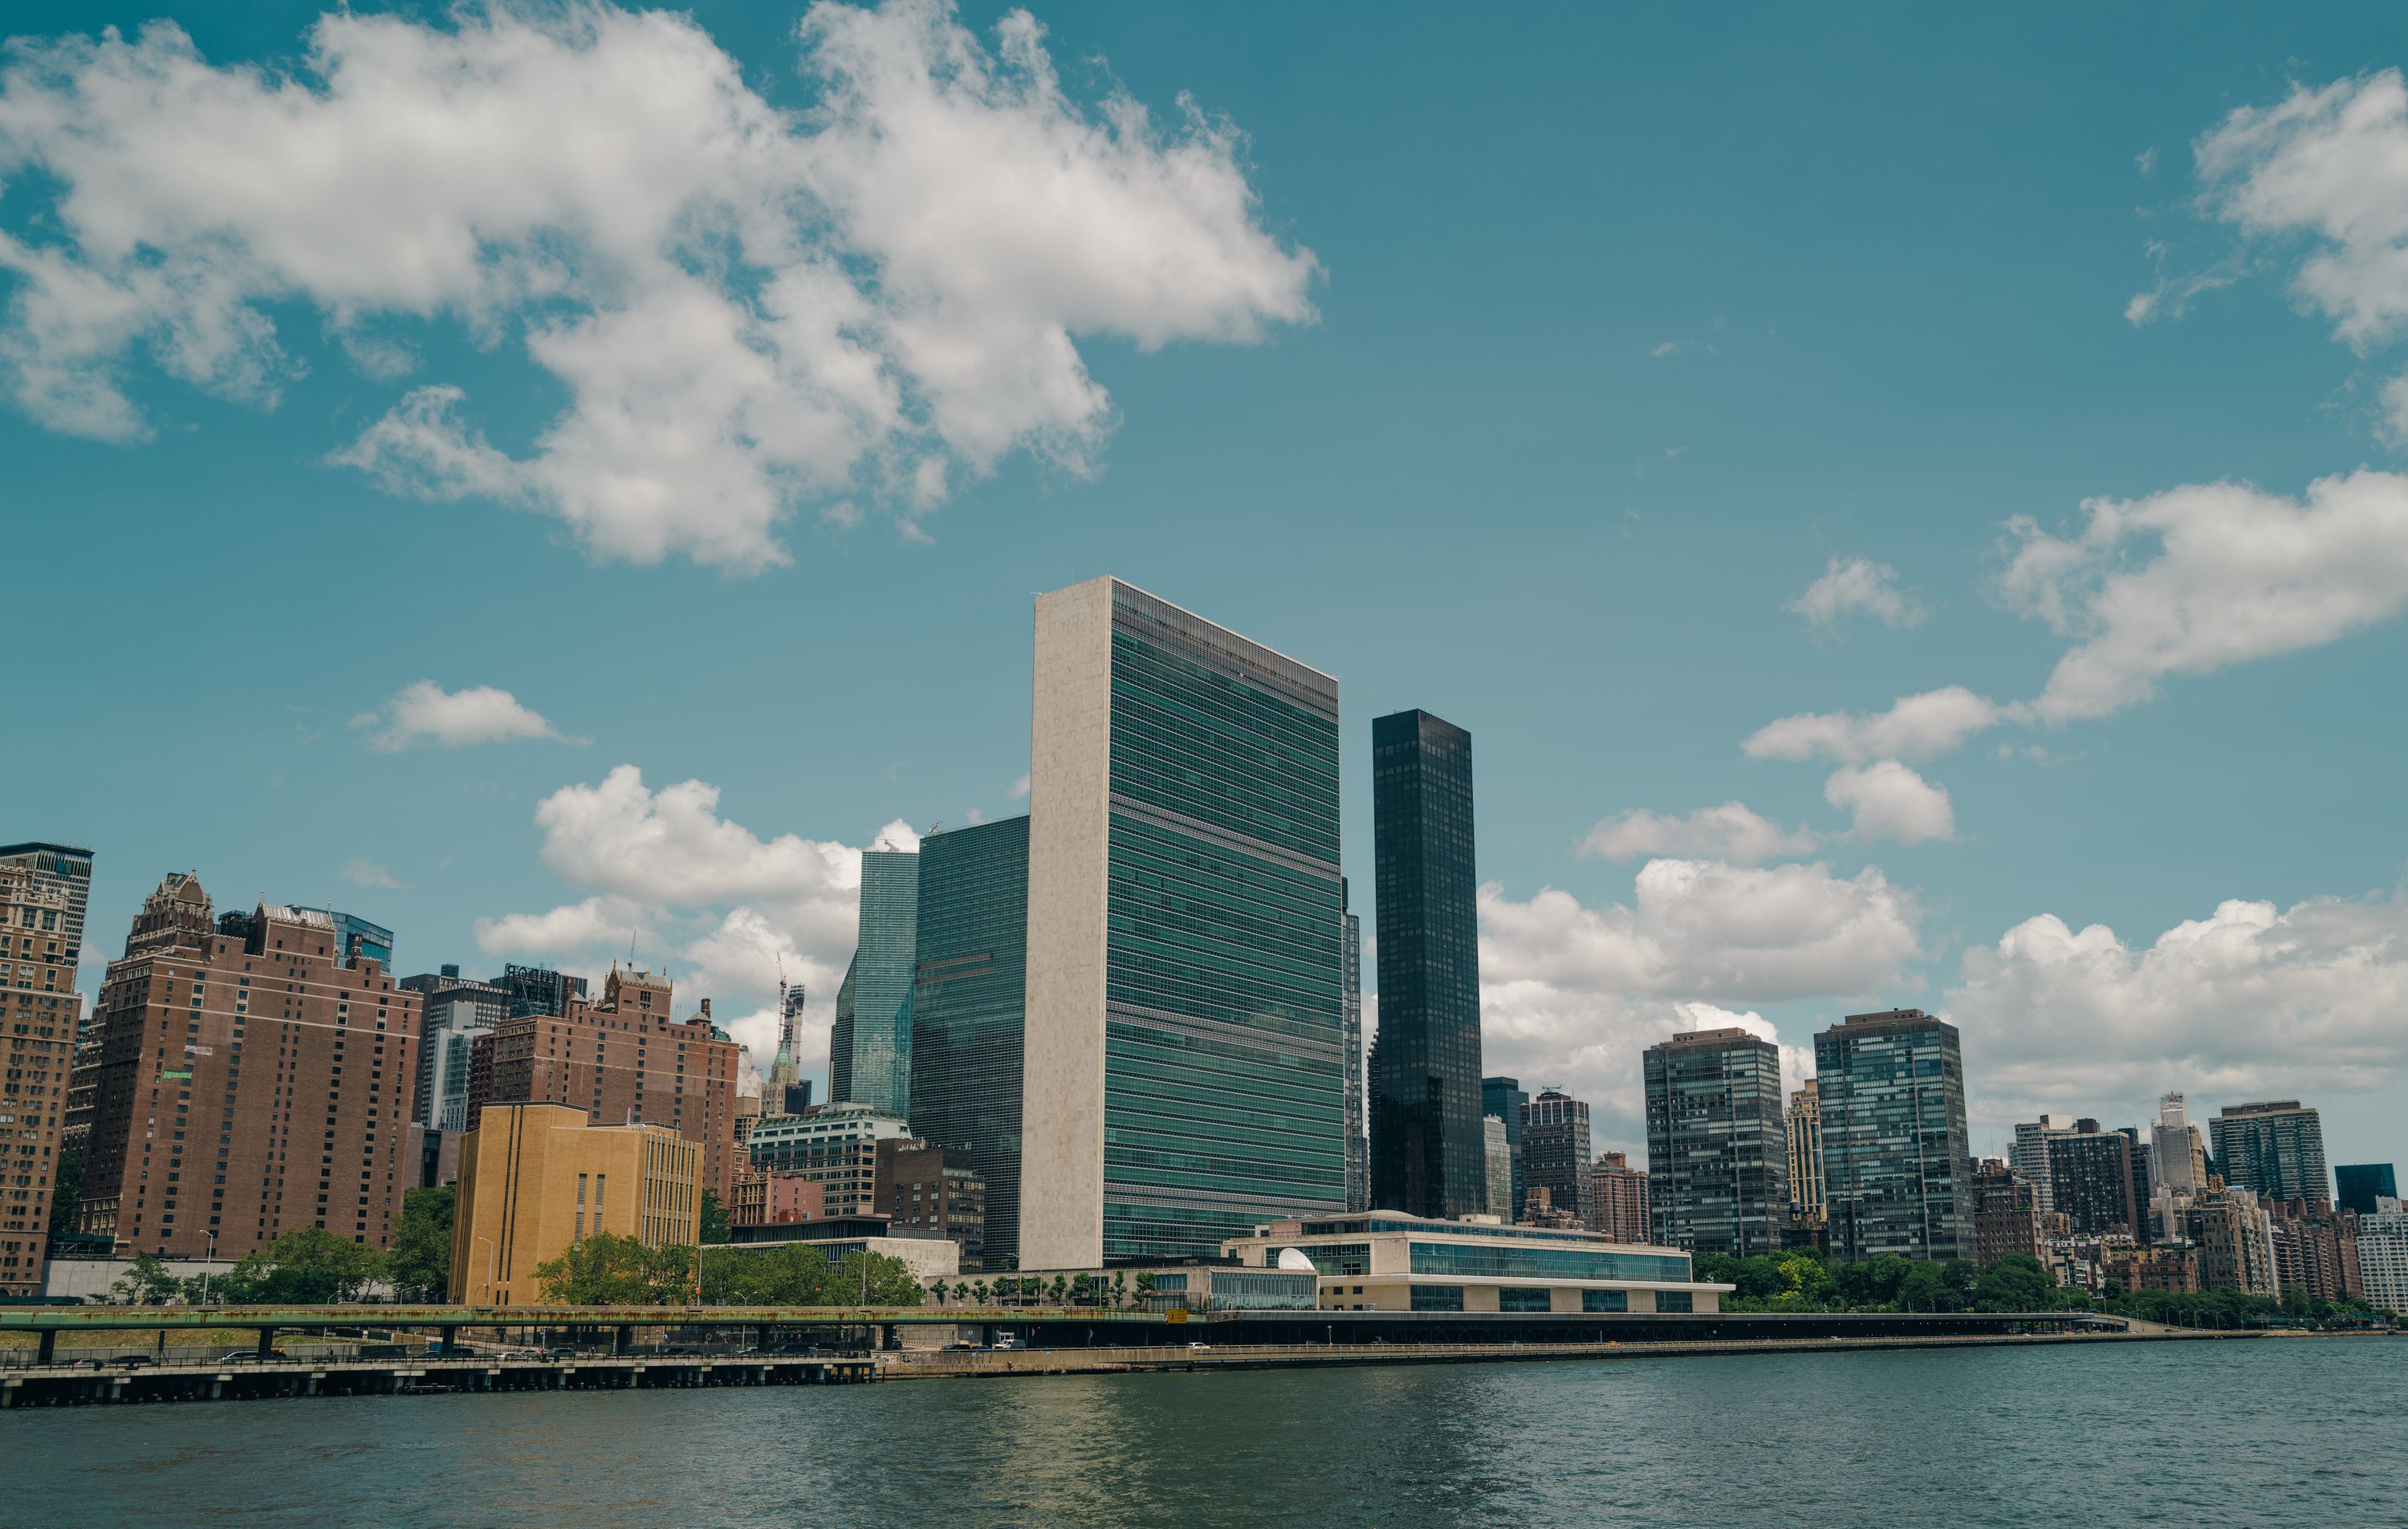 UN Building from the East River